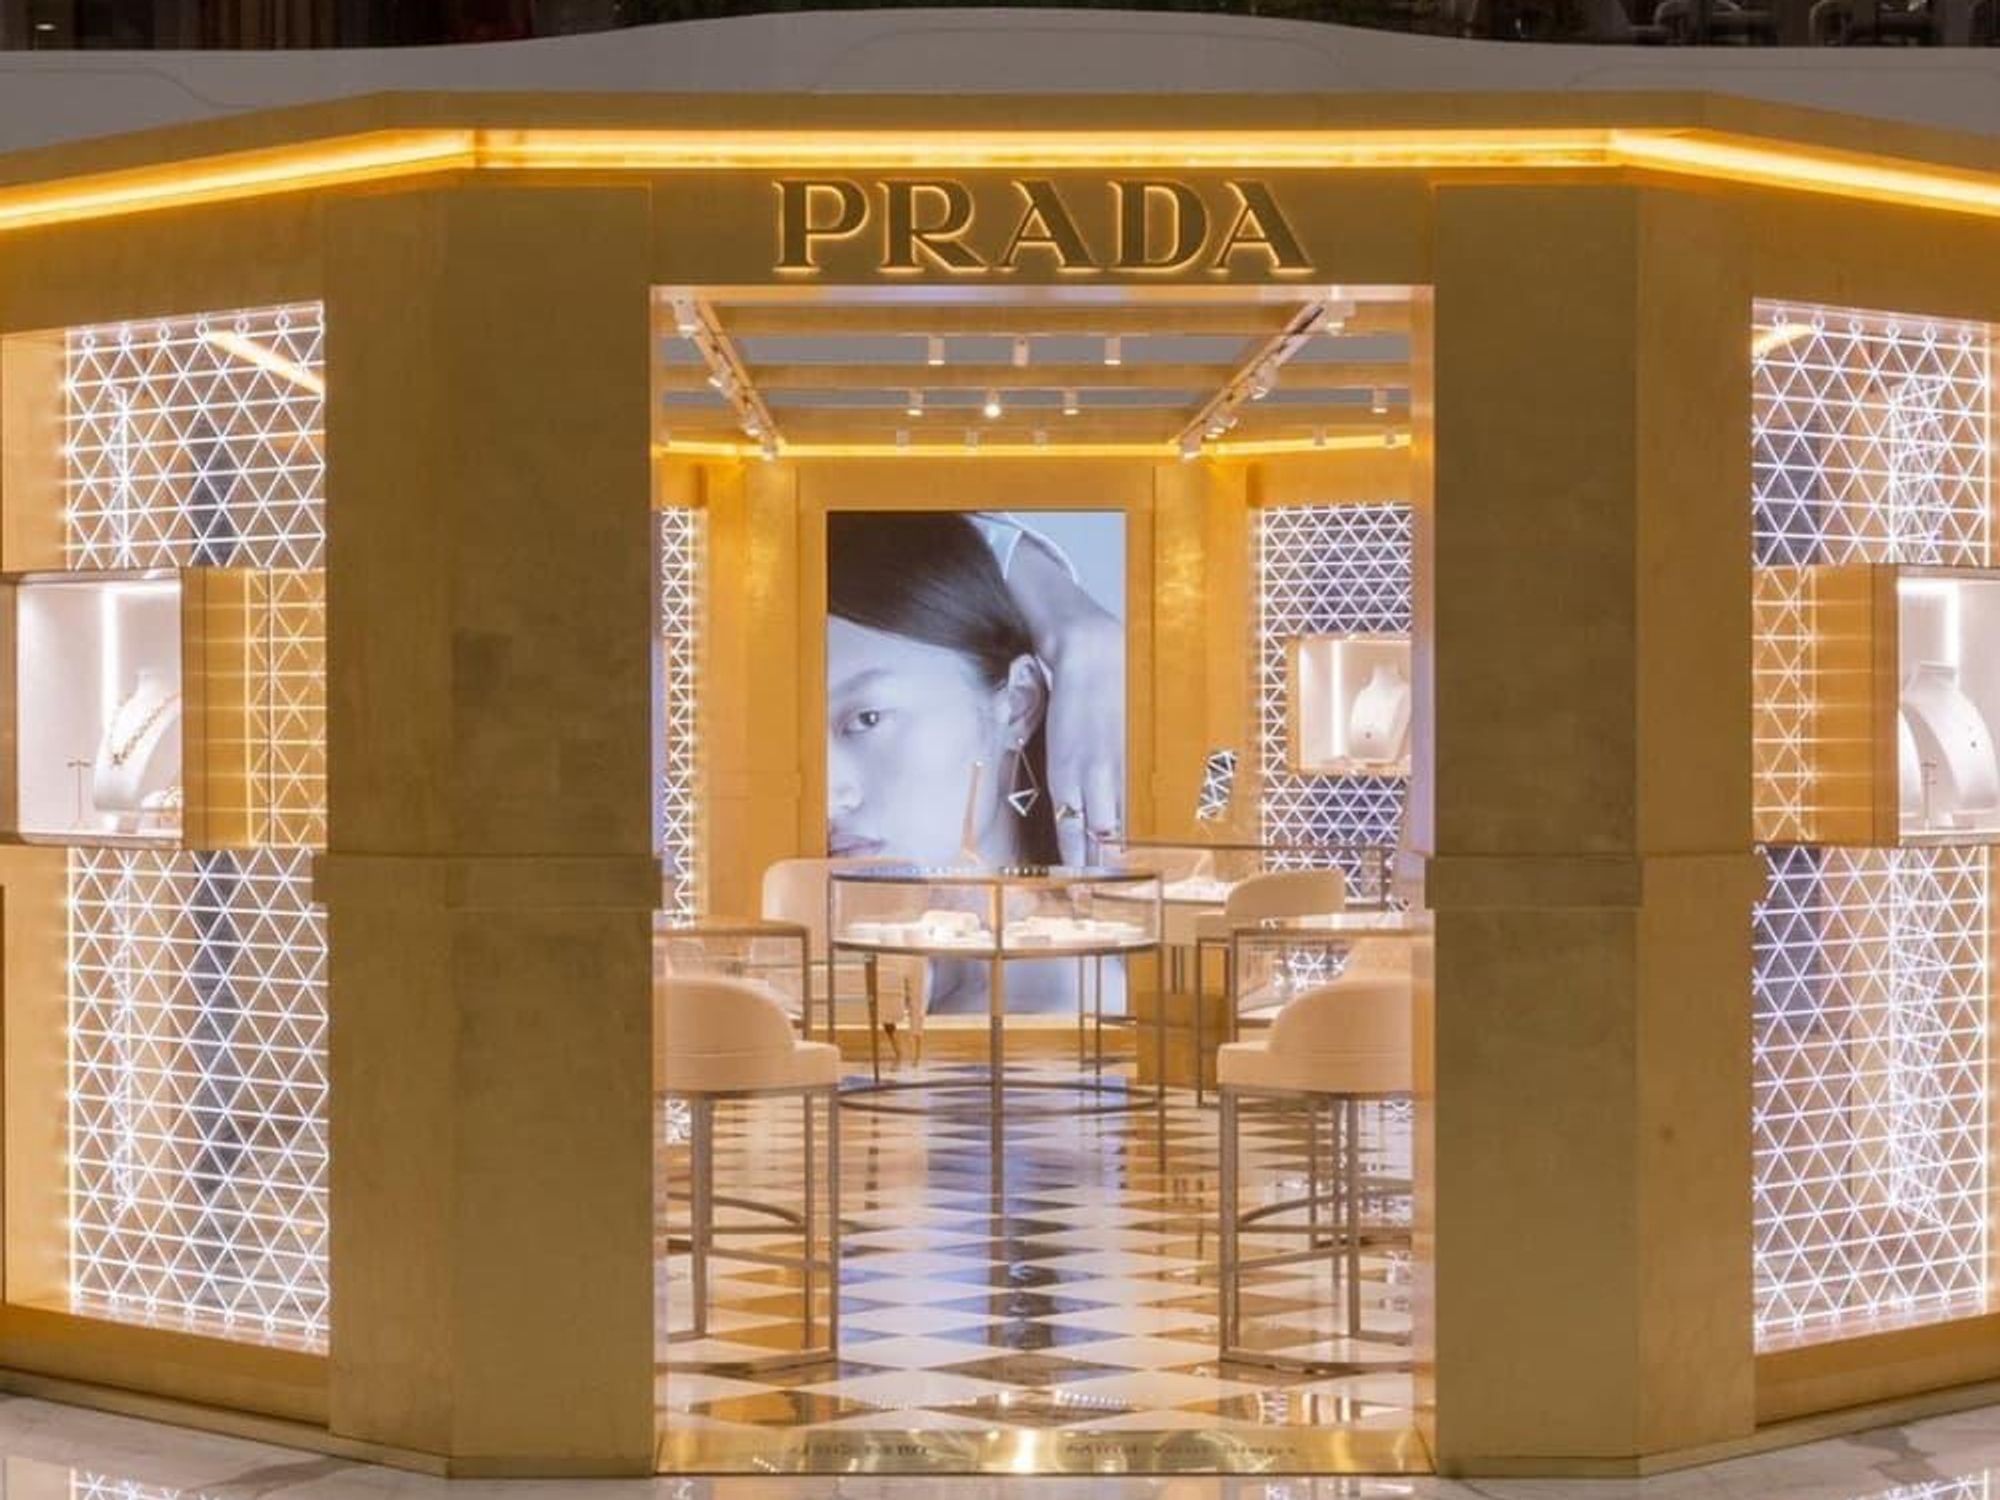 The Prada Logo And Brand: The Significance Of The Iconic Design